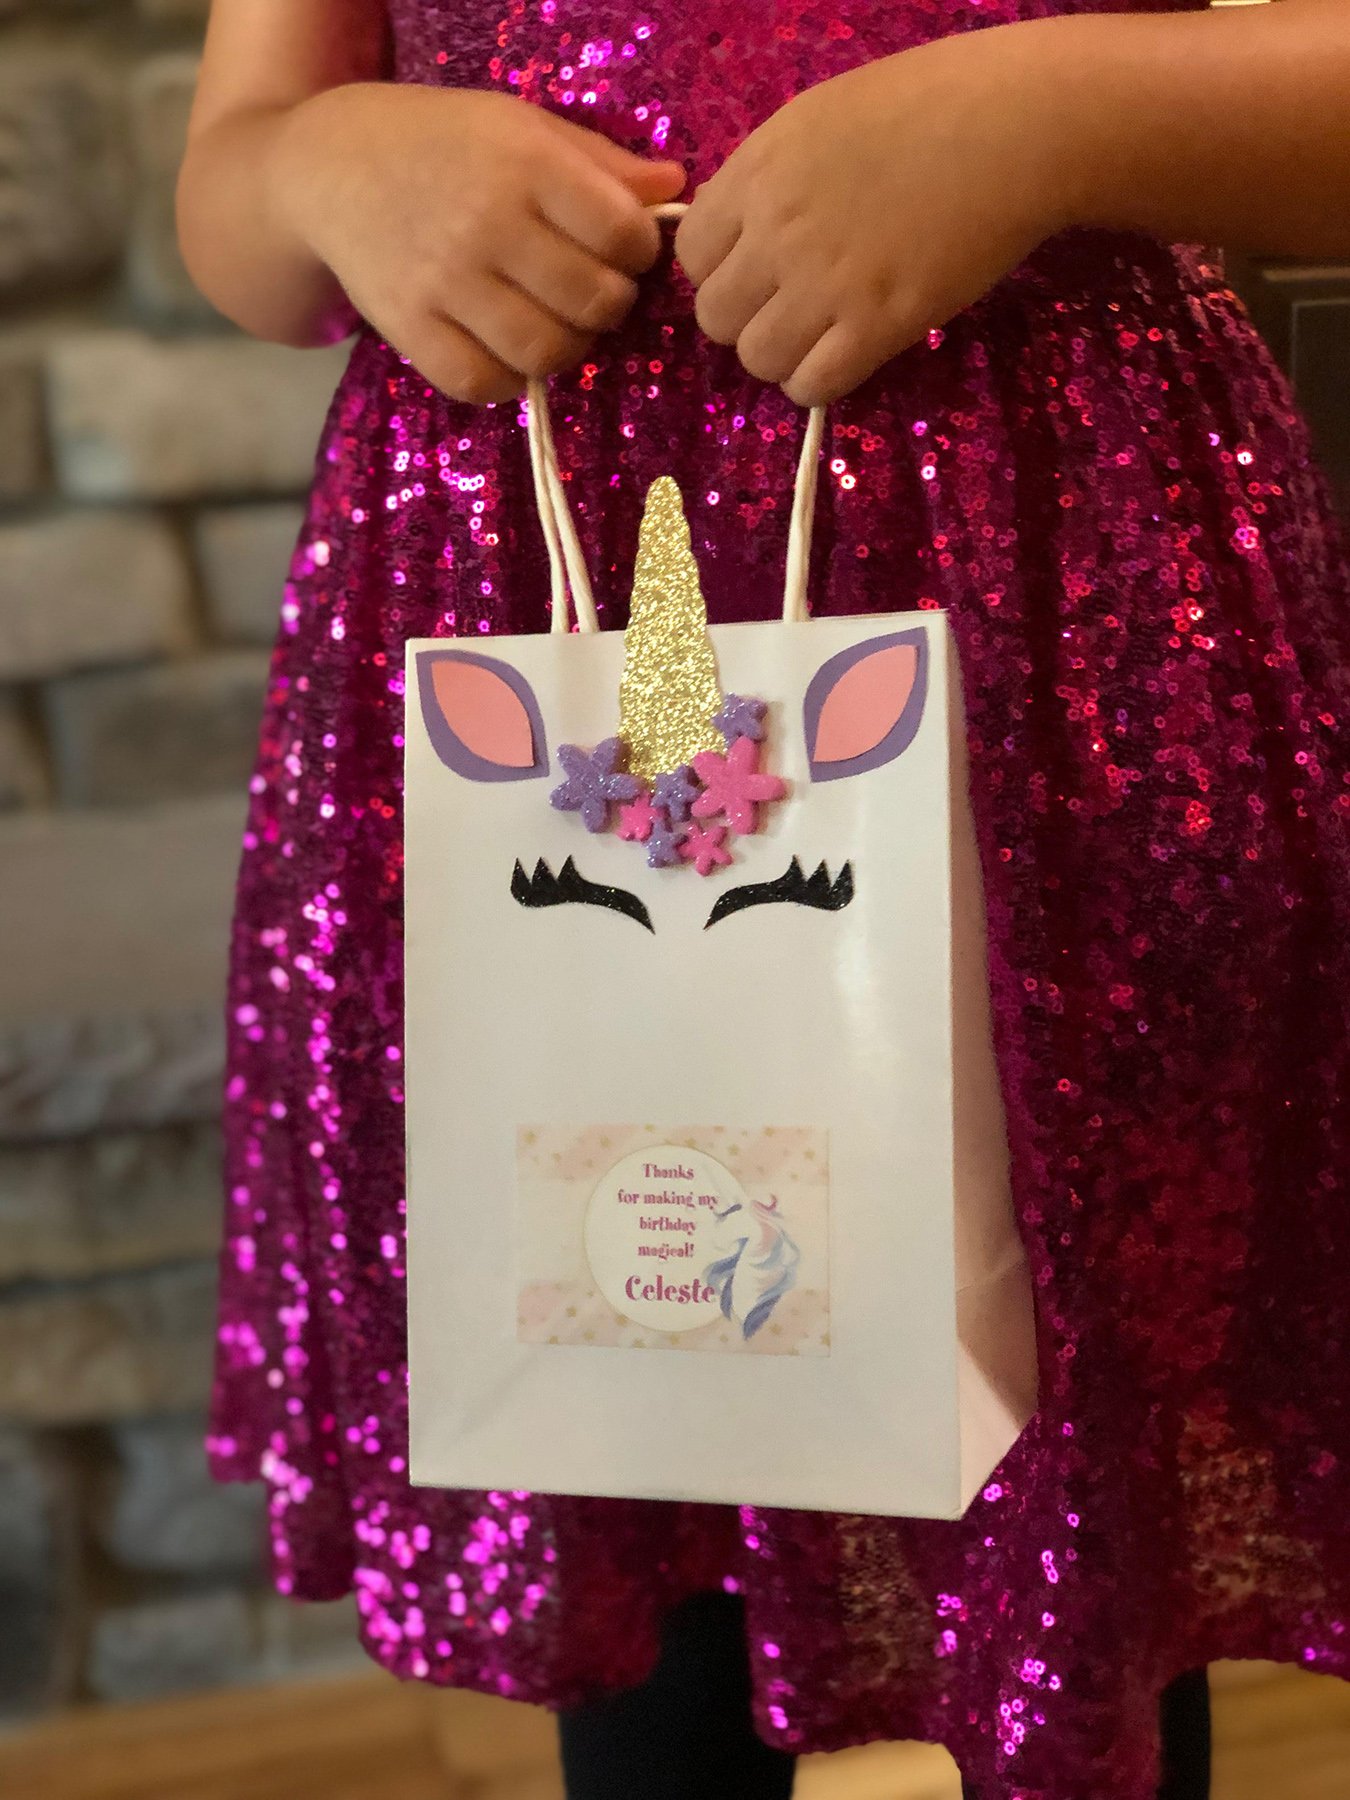 Details about   X 20 GIRLS CUTE UNICORN DREAMS PINK BIRTHDAY PARTY  TREAT PAPER GIFT BAGS